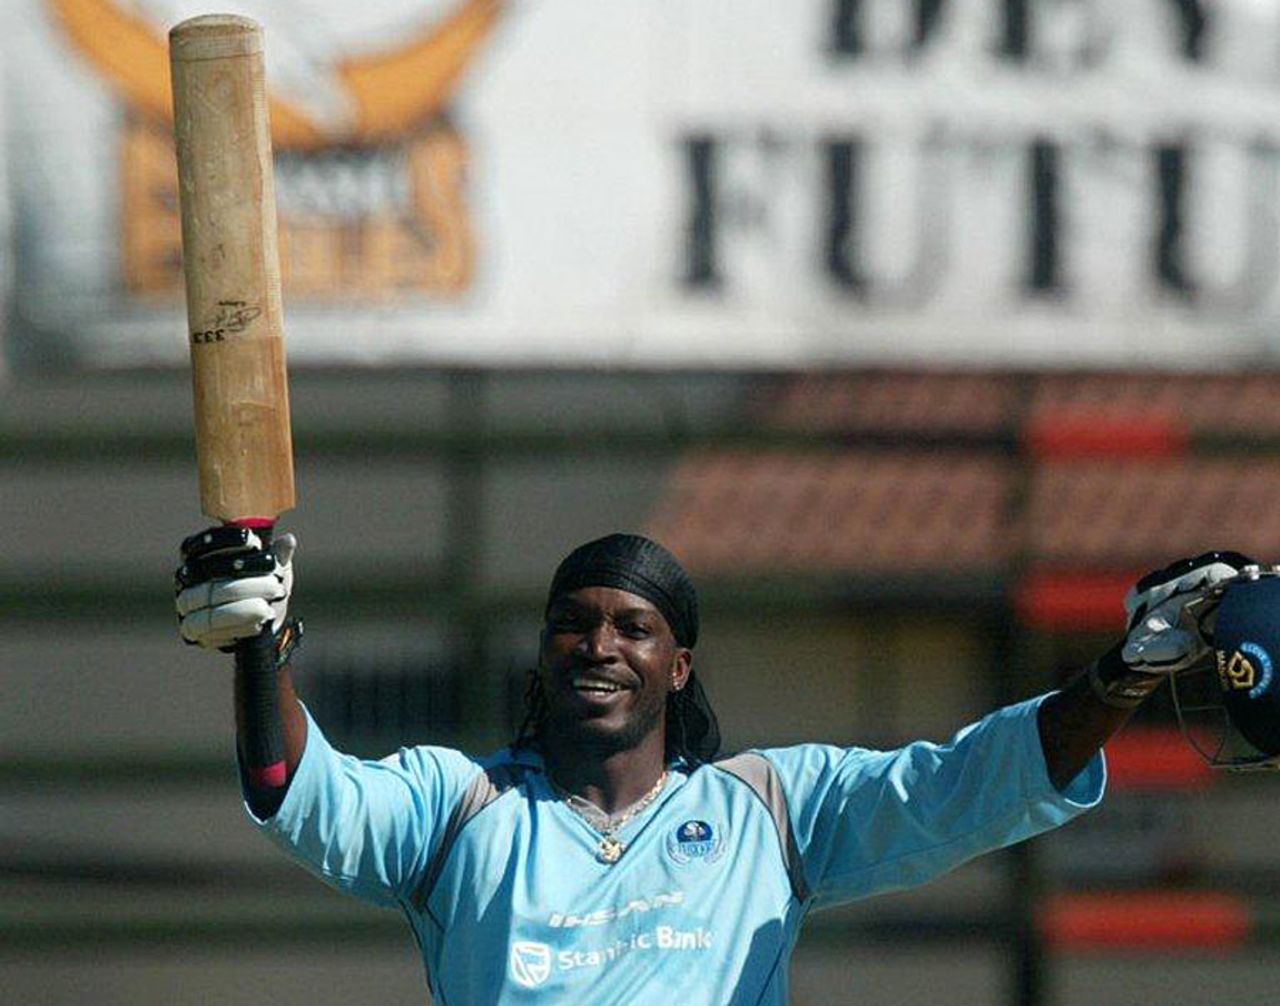 Chris Gayle celebrates his century for Matabeleland Tuskers, Mid West Rhinos v Matabeleland Tuskers Stanbic Bank 20 Series, Harare, November 29, 2011